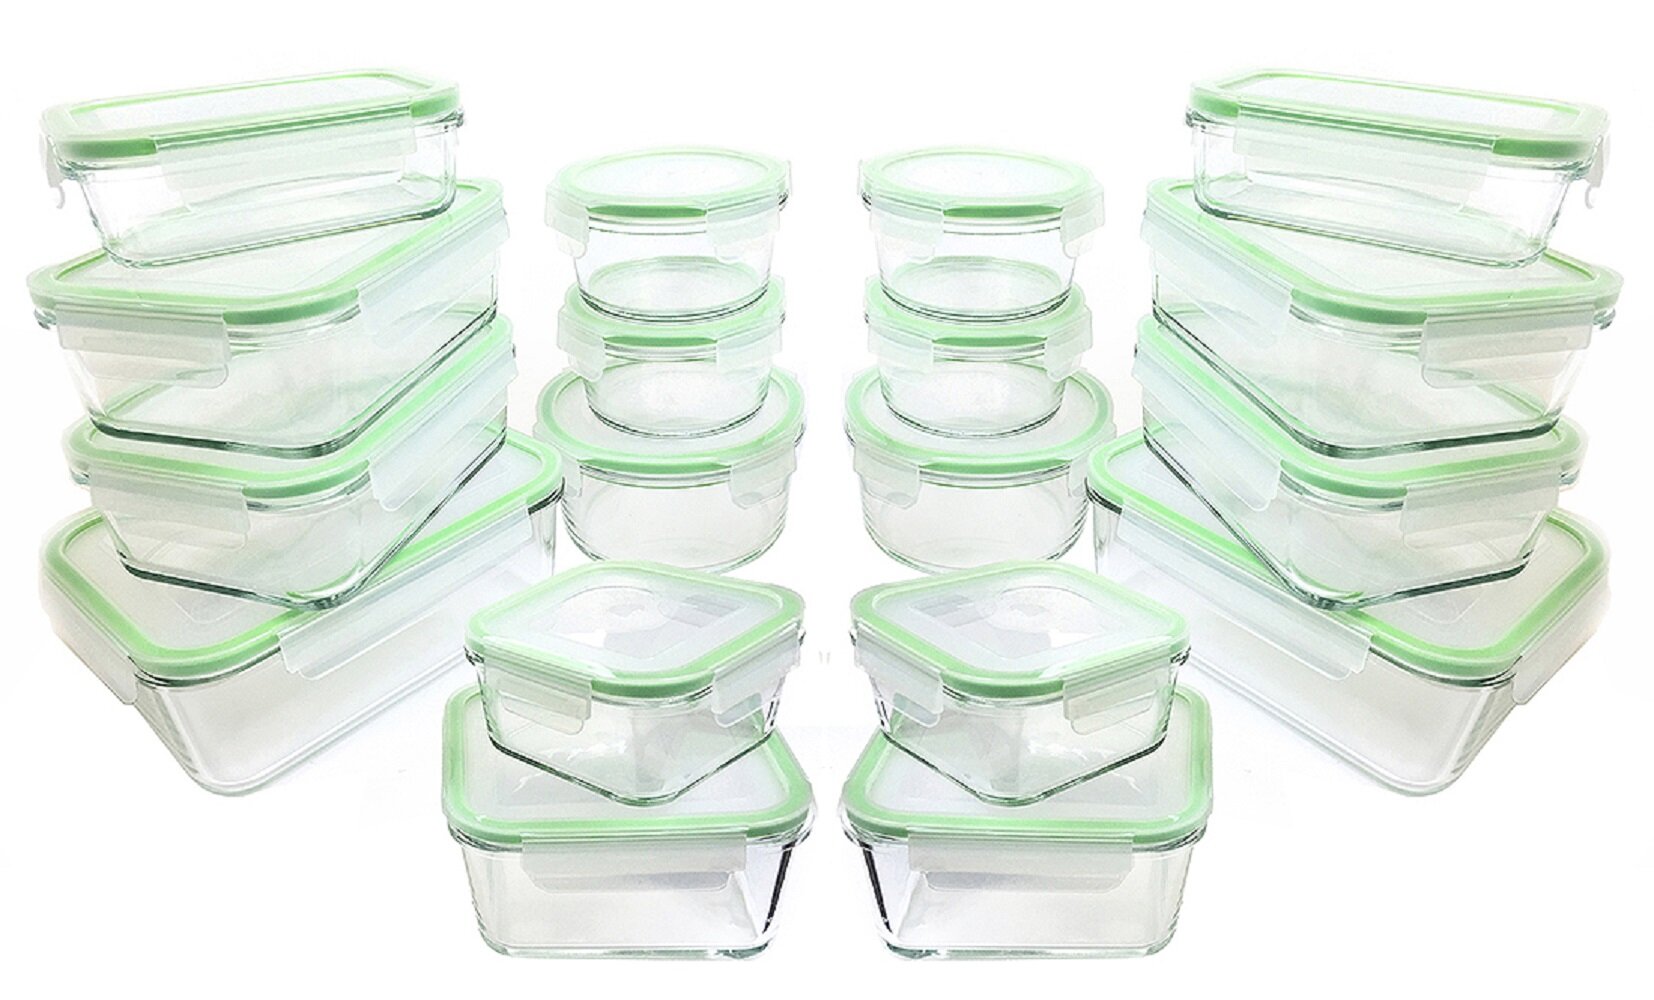  Pyrex Meal Prep Simply Store Glass Rectangular and Round Food  Container Set (18-Piece, BPA-free), Multicolor: Home & Kitchen